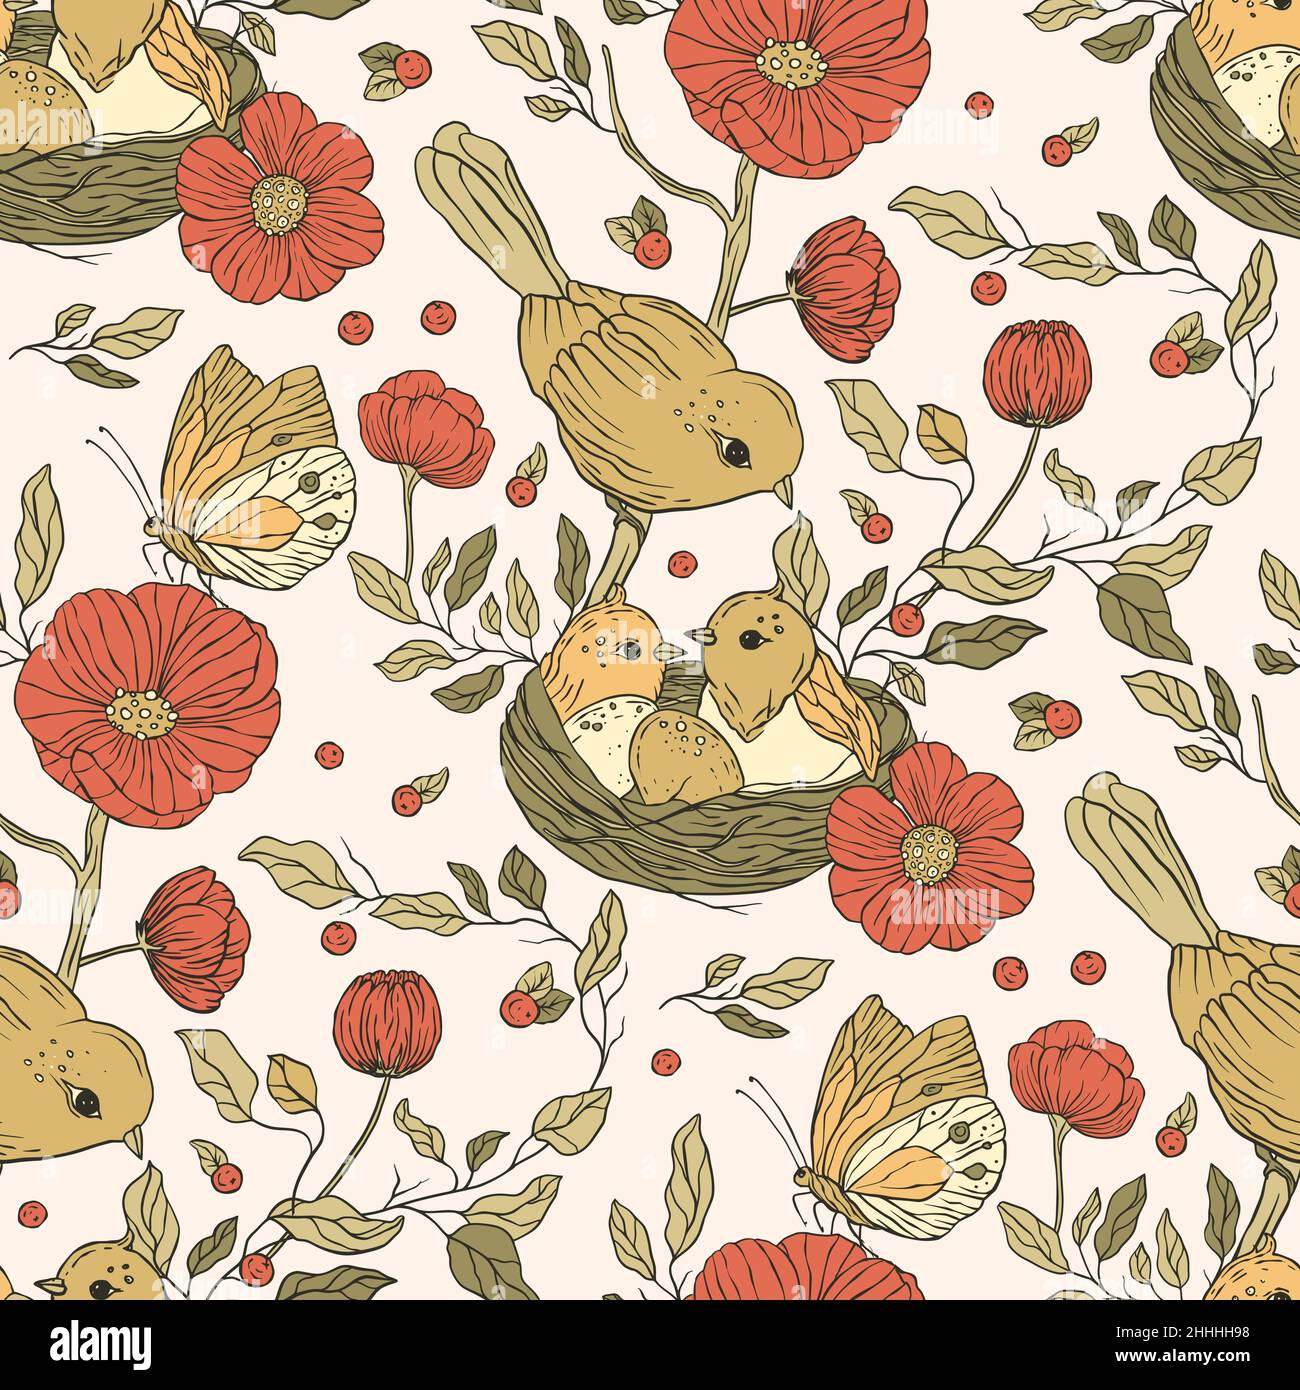 Vintage aesthetic bird boho floral seamless pattern with flower and nest Stock Vector